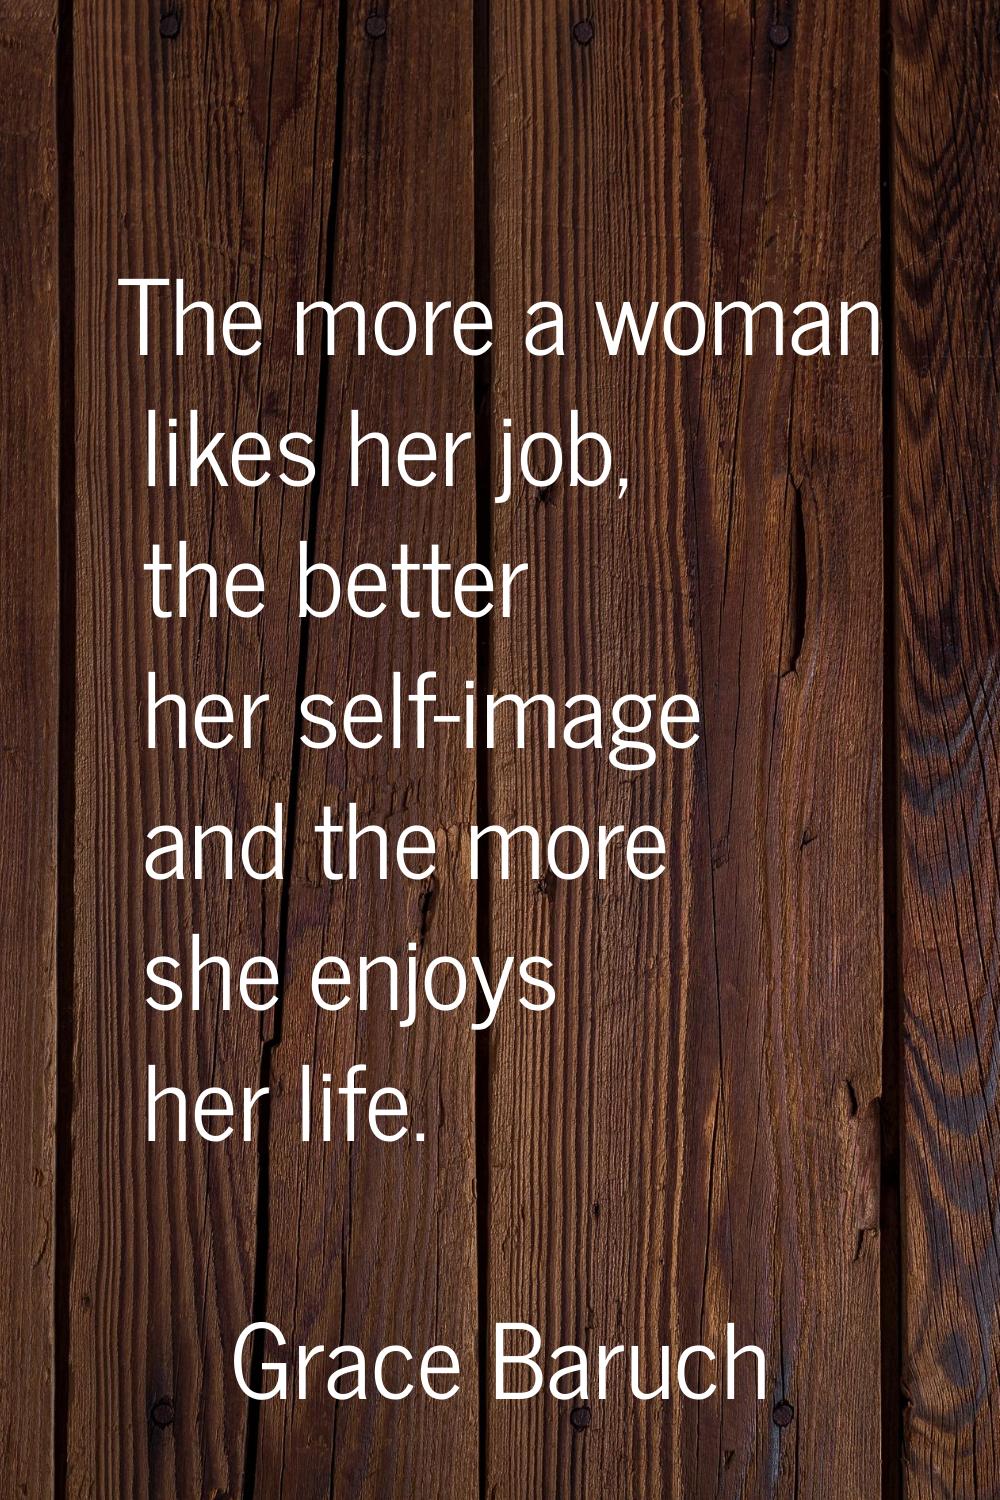 The more a woman likes her job, the better her self-image and the more she enjoys her life.